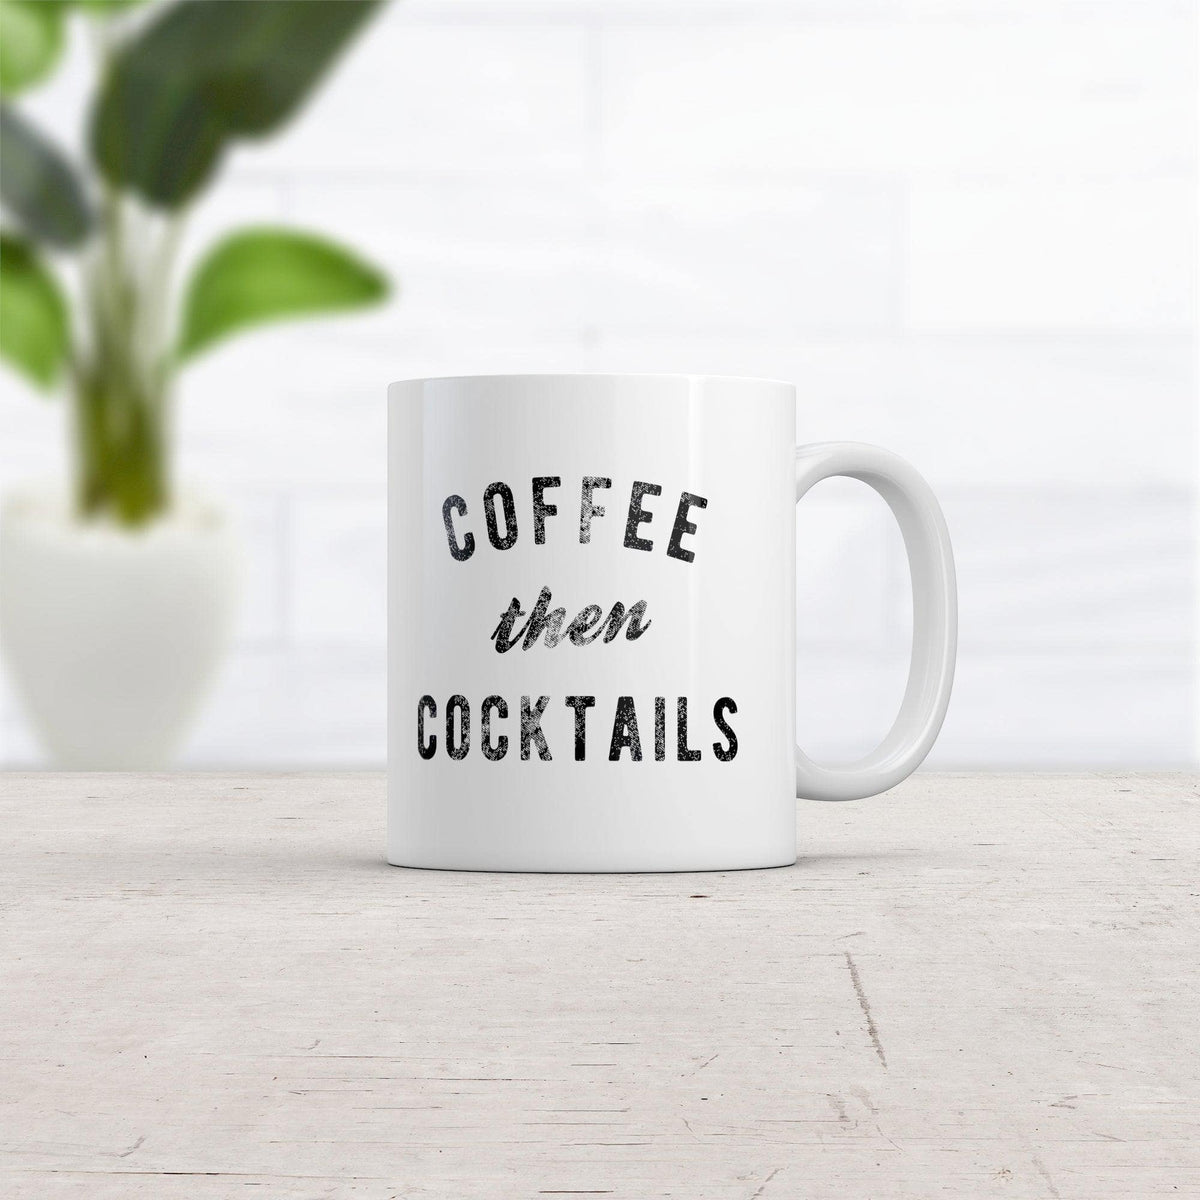 Coffee Then Cocktails Mug Funny Caffeine Alcohol Drinking Novelty Cup-11oz  -  Crazy Dog T-Shirts